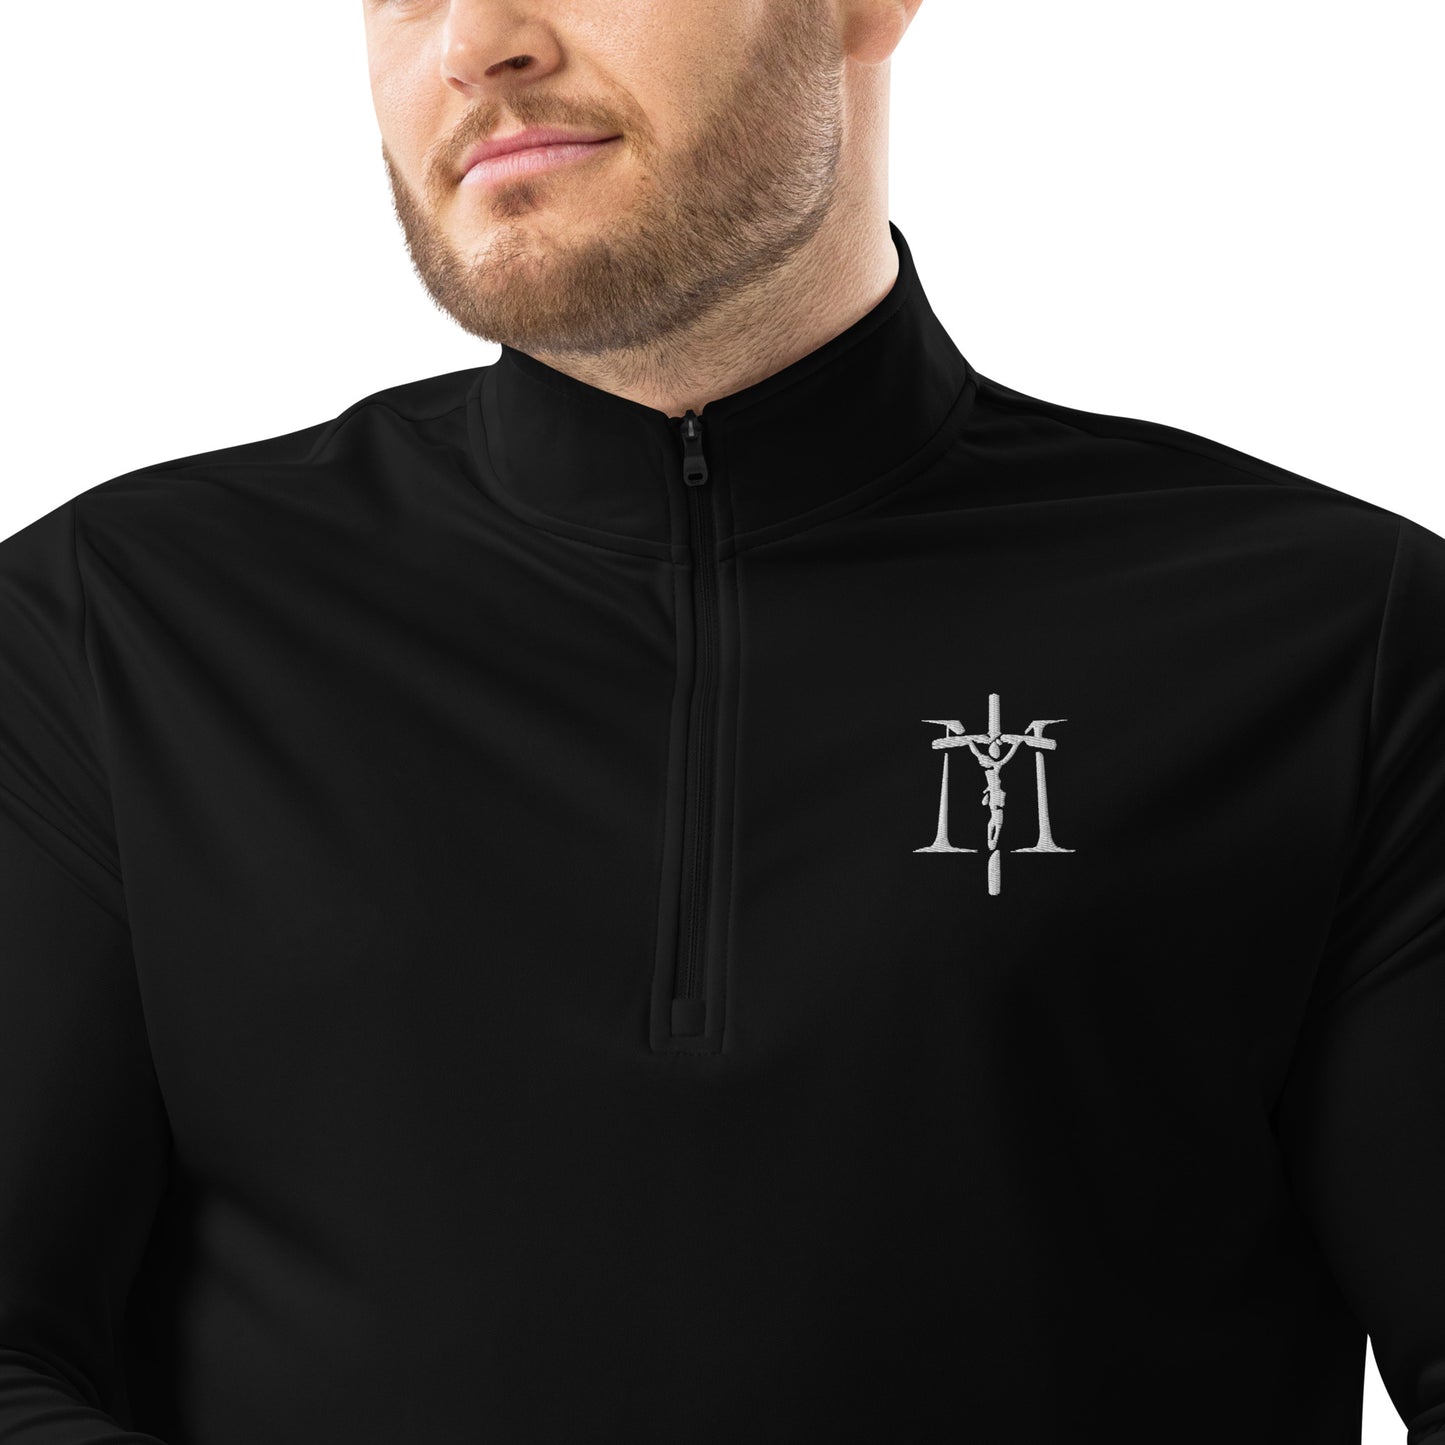 Mysteries of the Rosary Embroidered Quarter zip pullover